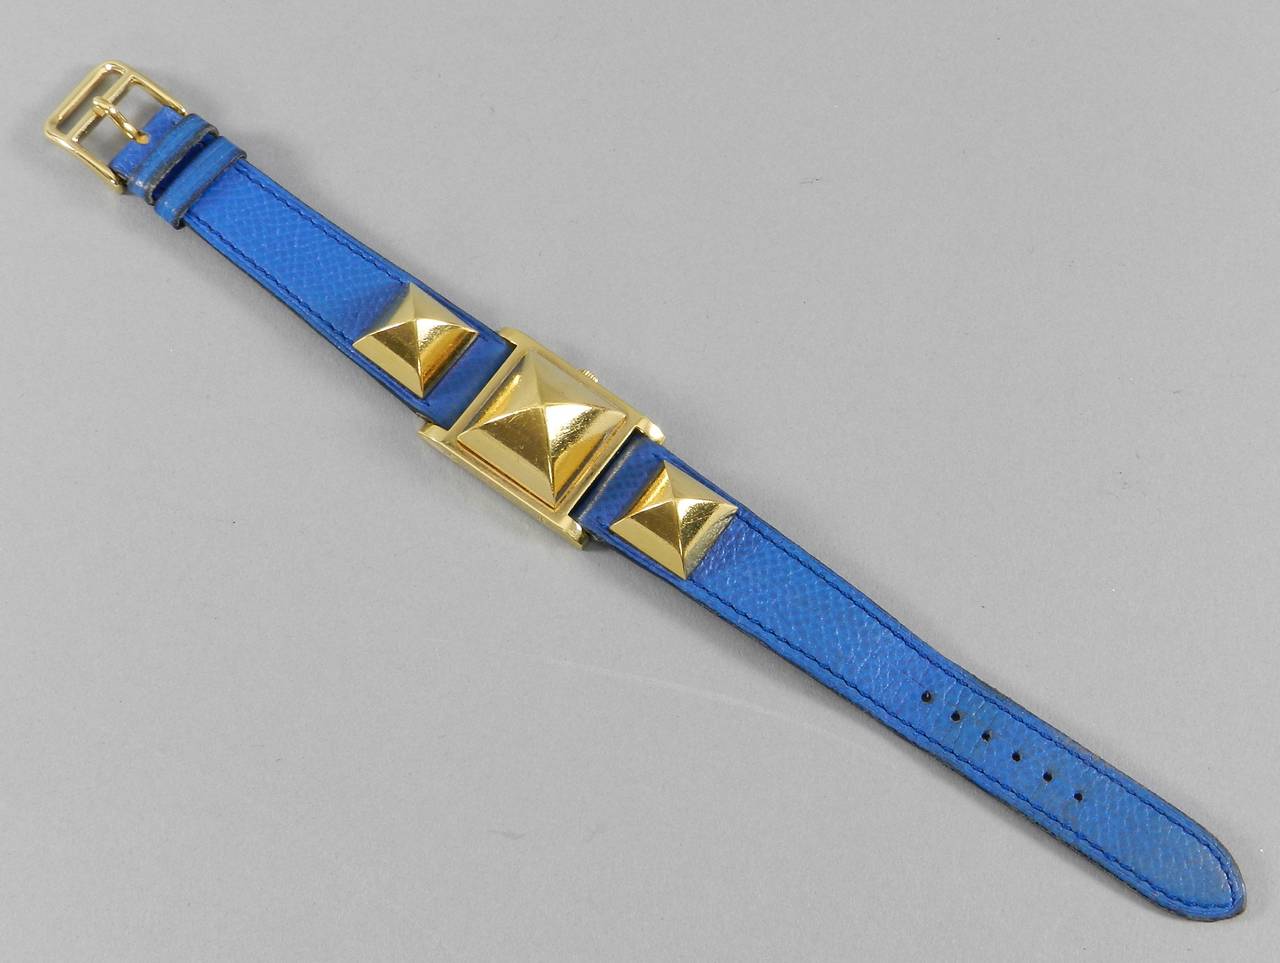 Hermes Medor watch in goldtone metal and blue leather strap. Excellent previously owned condition. Front face measures 7/8